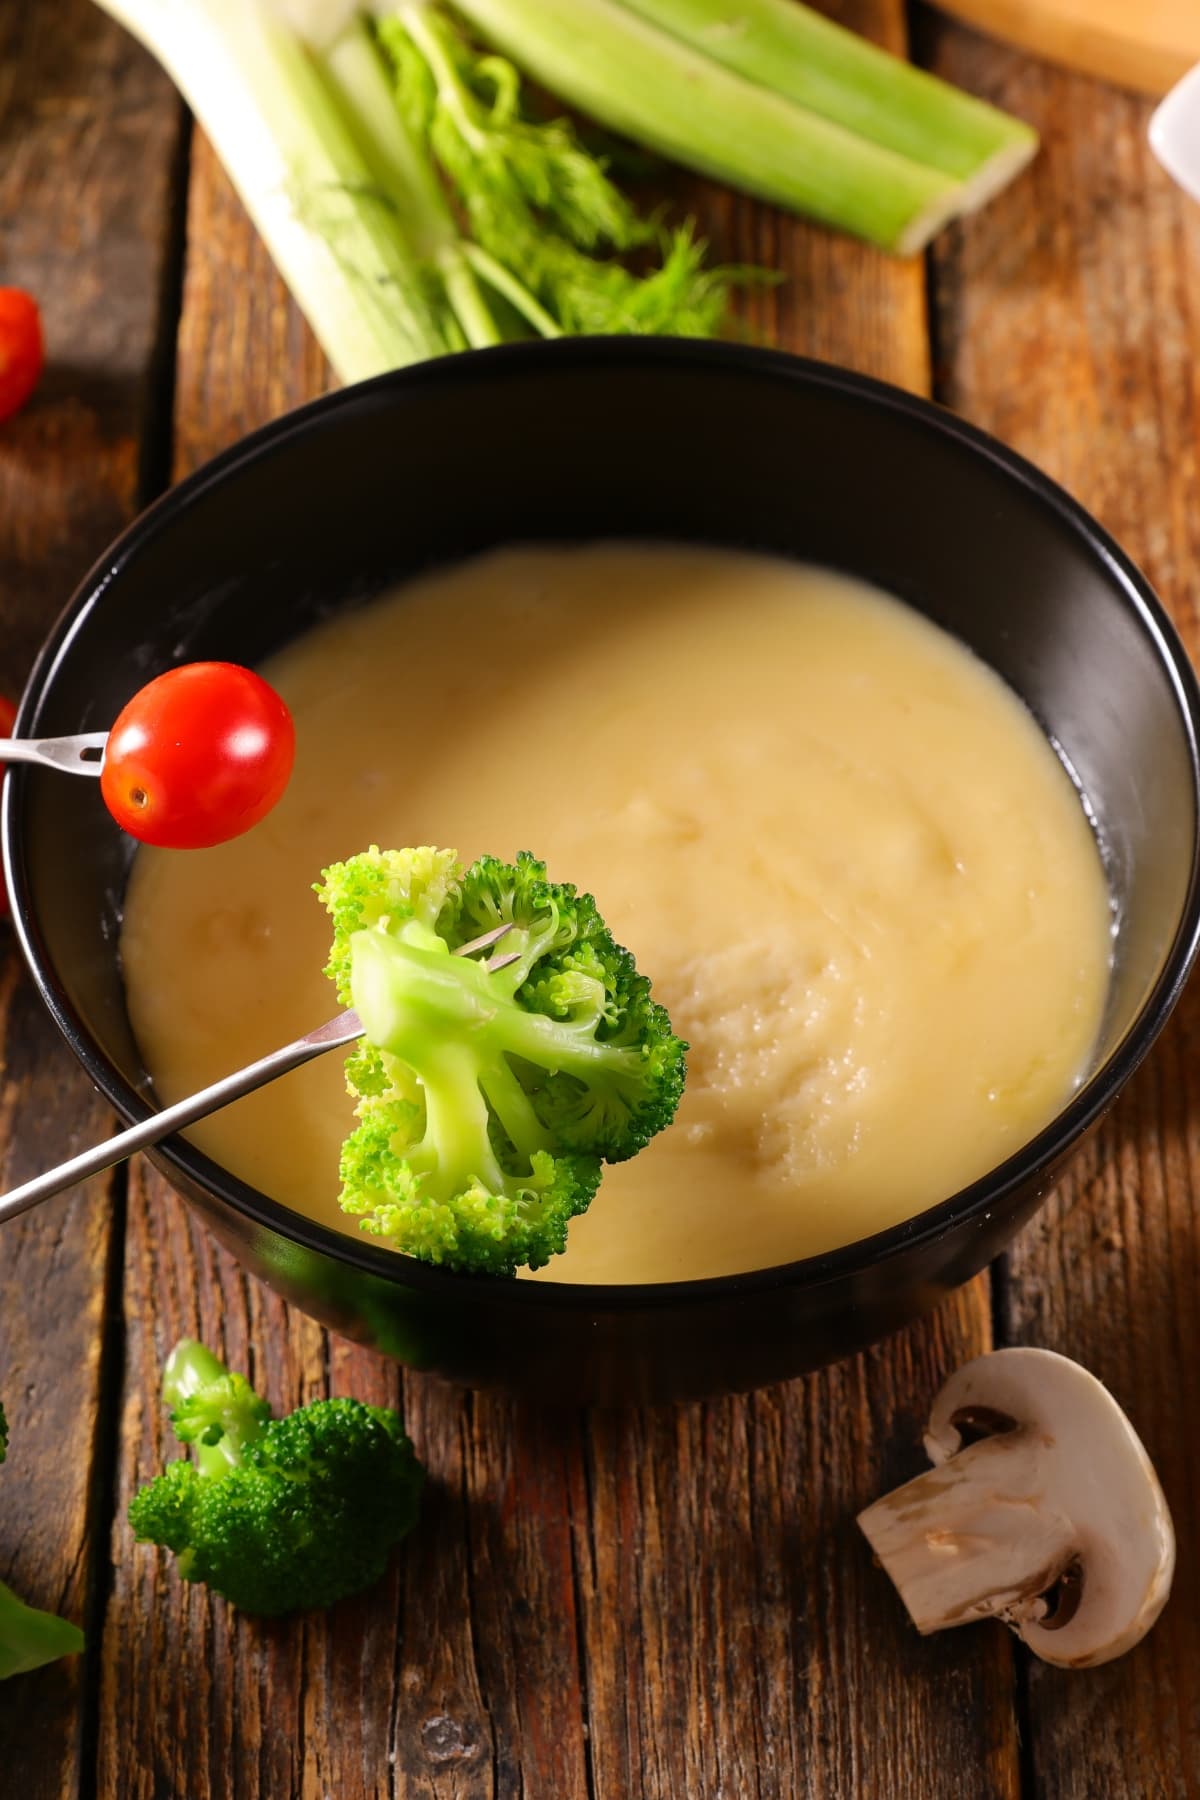 Cheese Fondue in a Black Bowl with Various Vegetables